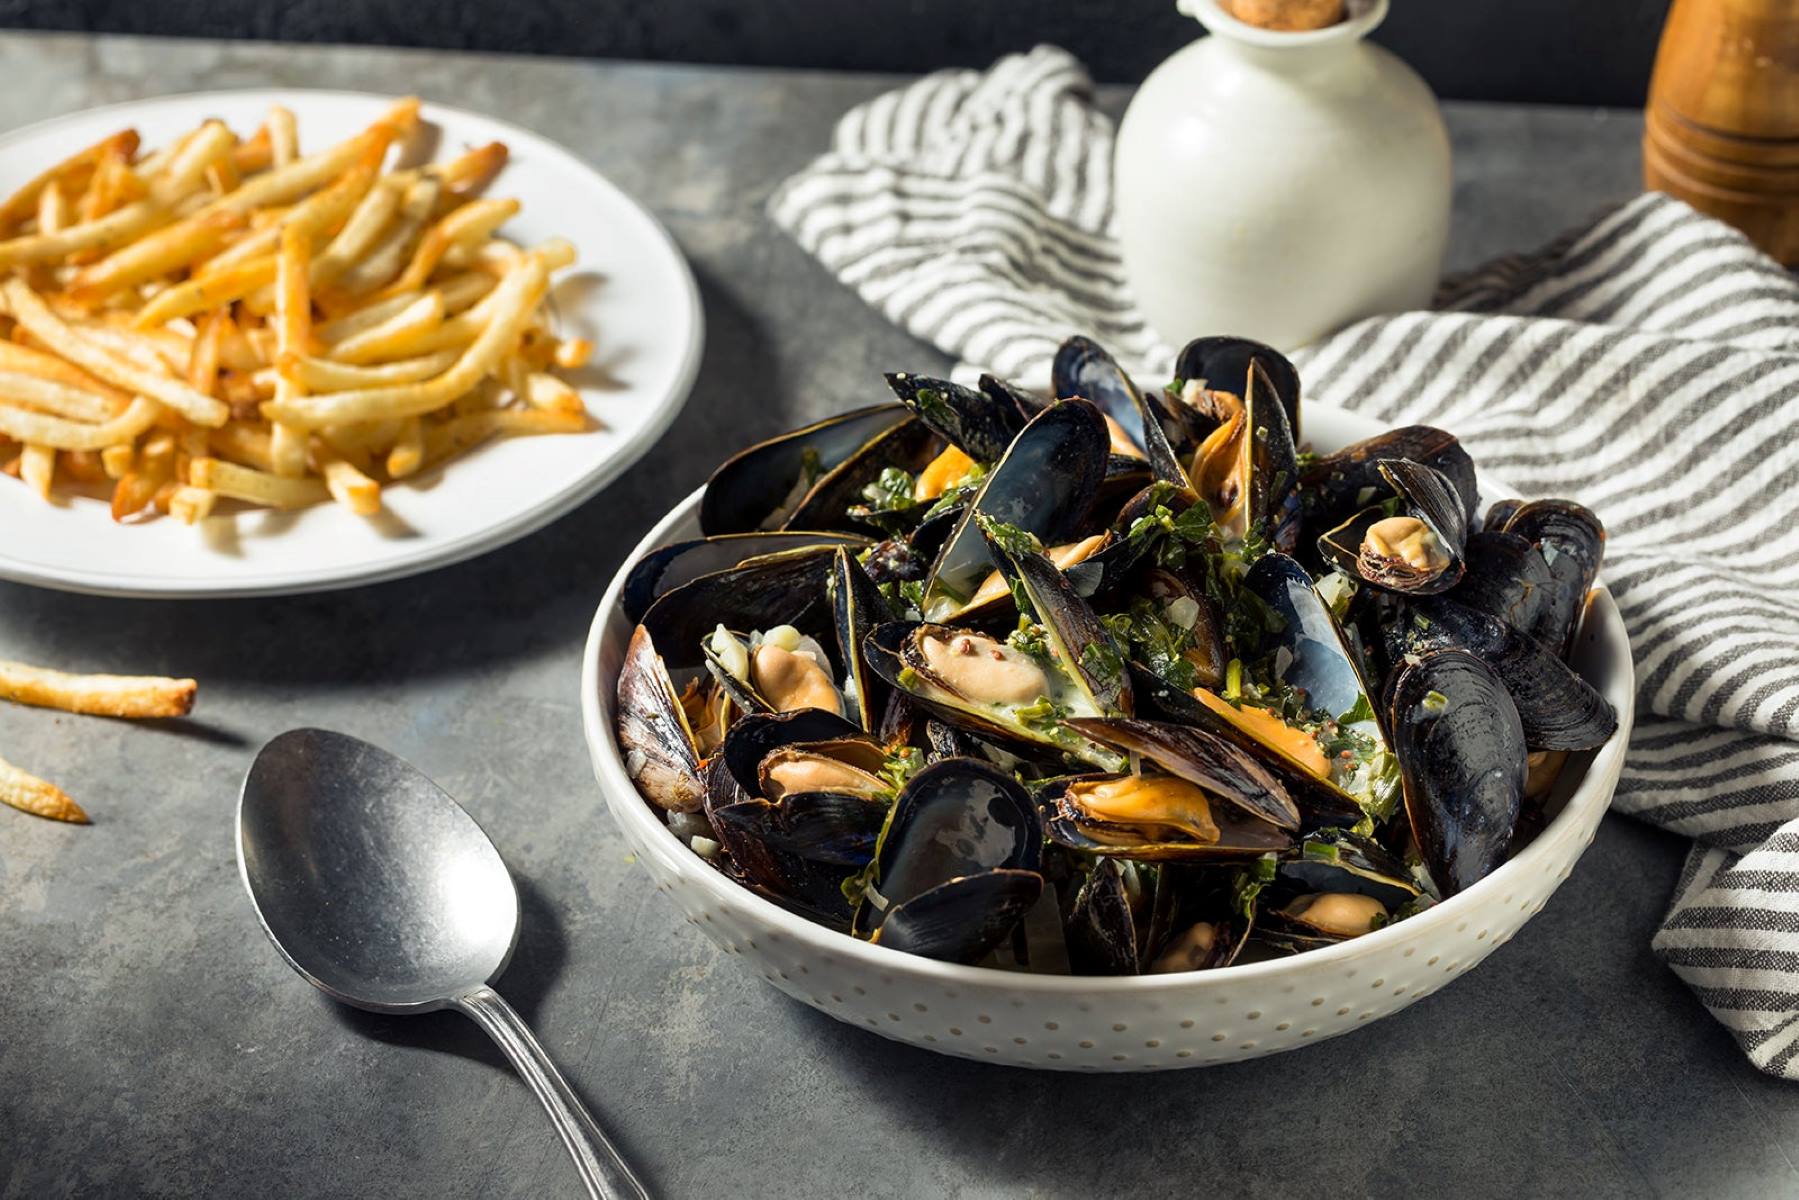 Discover The Exquisite Delicacy Of Belgium Mussels – A Must-Try Dish From Around The World